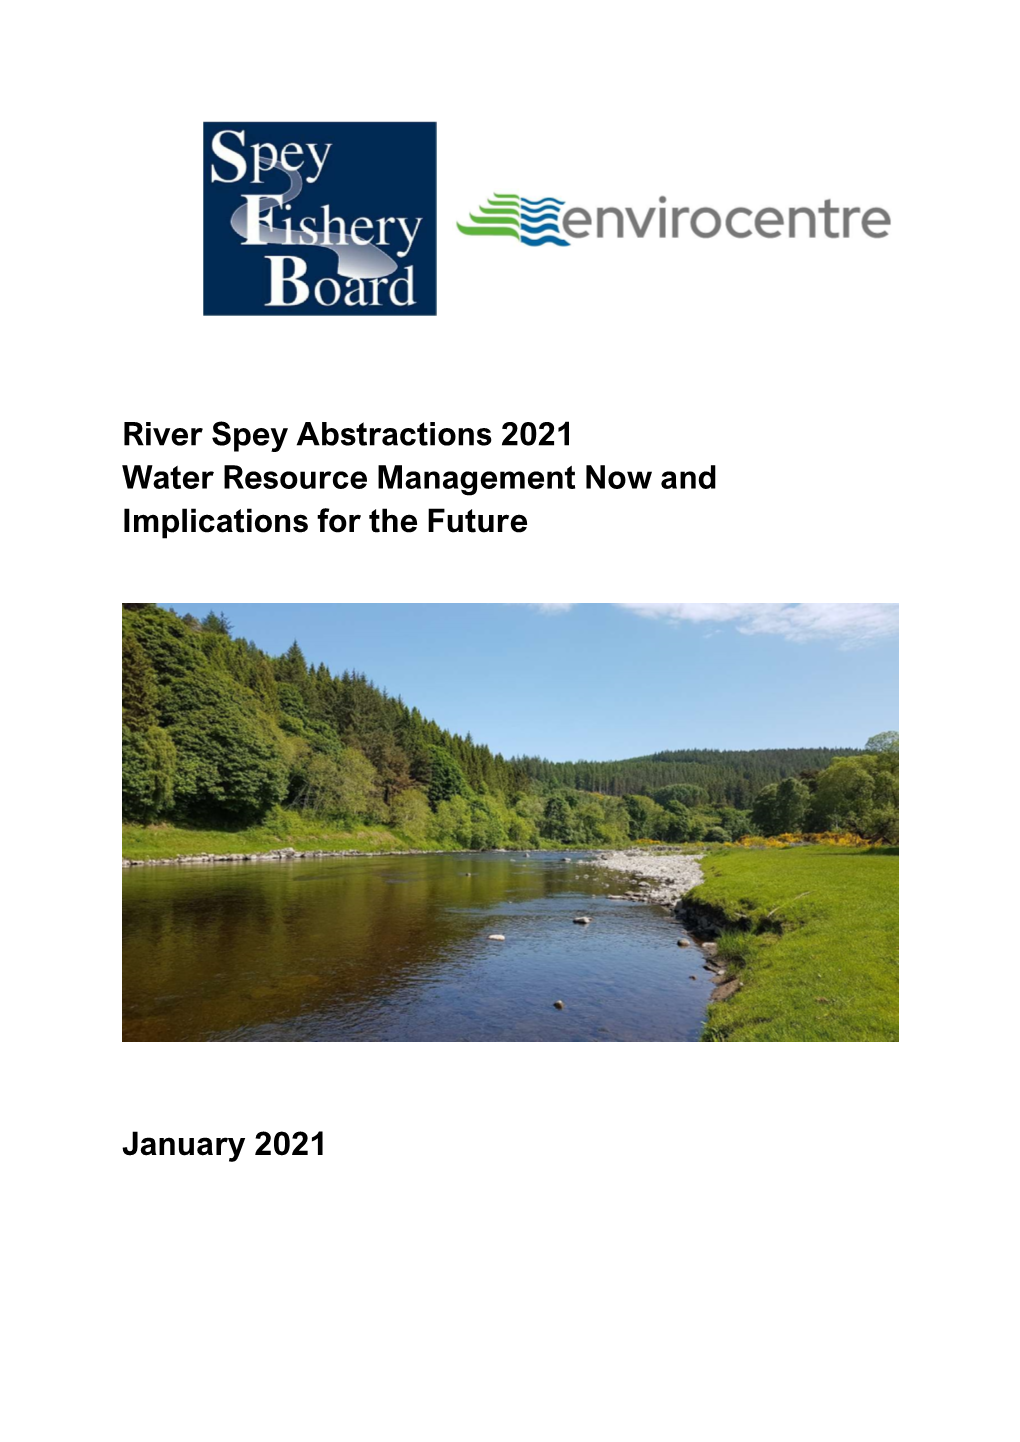 River Spey Abstractions 2021 Water Resource Management Now and Implications for the Future January 2021